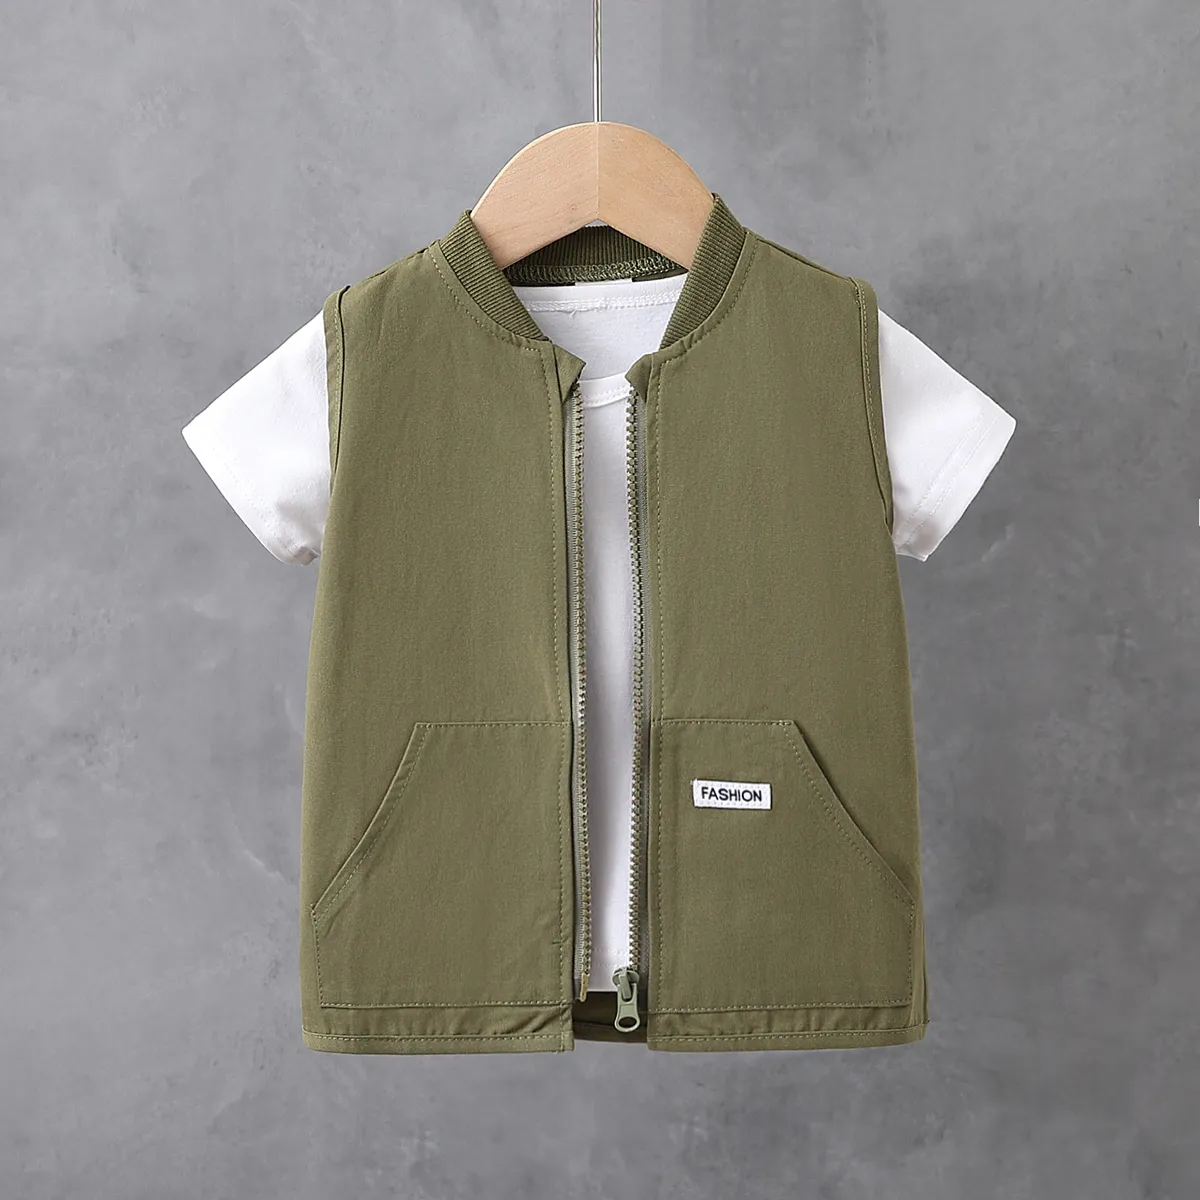 Casual Boy's Cotton Vest with Zipper, 1pcs, Regular Fit - Toddler Tops Army green big image 1